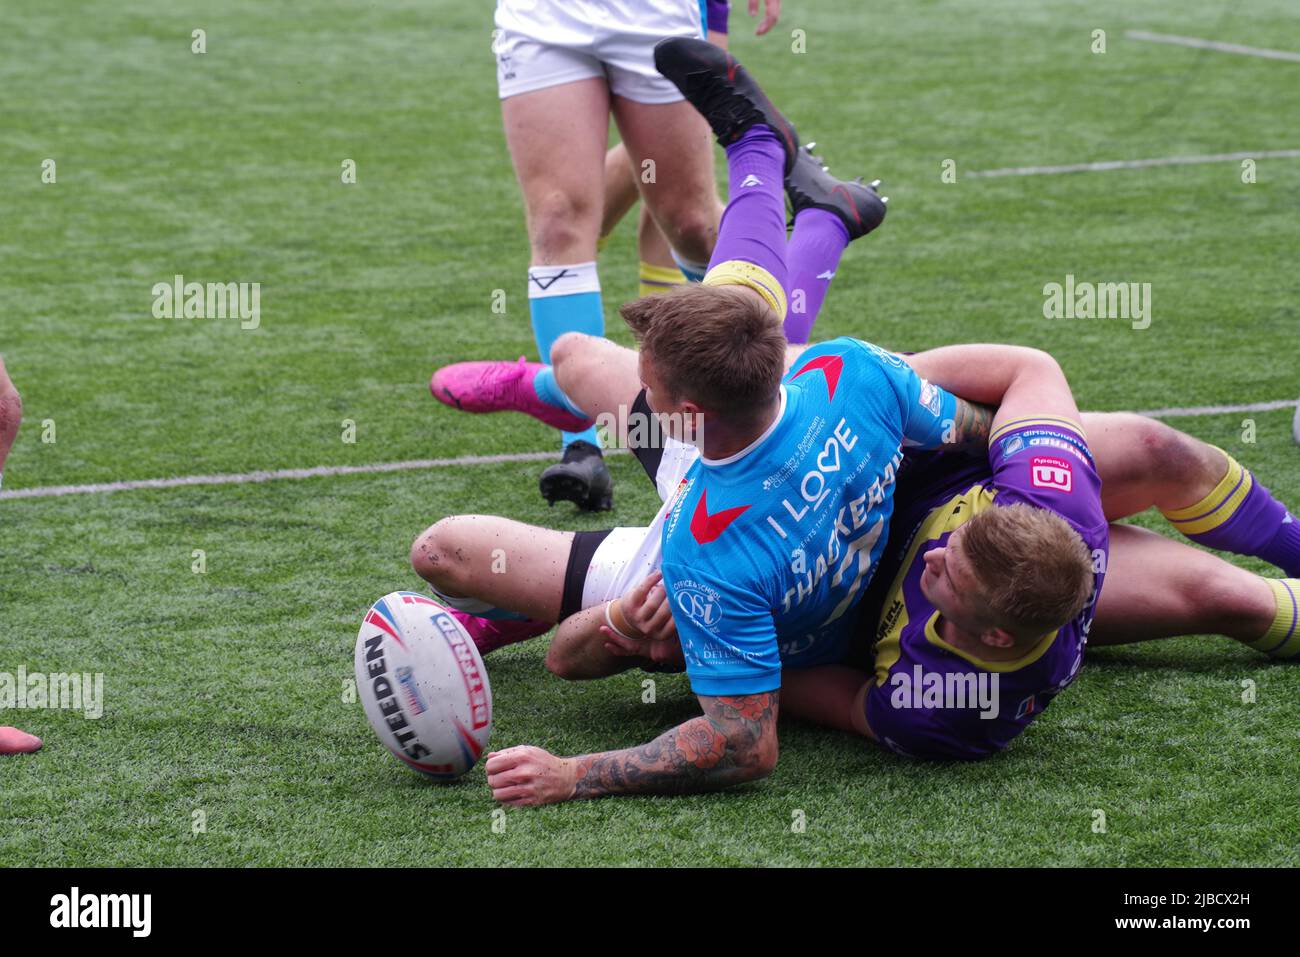 Newcastle, England, 5 June 2022. Anthony Thackeray scoring a try for Sheffield Eagles against Newcastle Thunder in the Betfred Championship at Kingston Park.  Credit: Colin Edwards / Alamy Live News Stock Photo